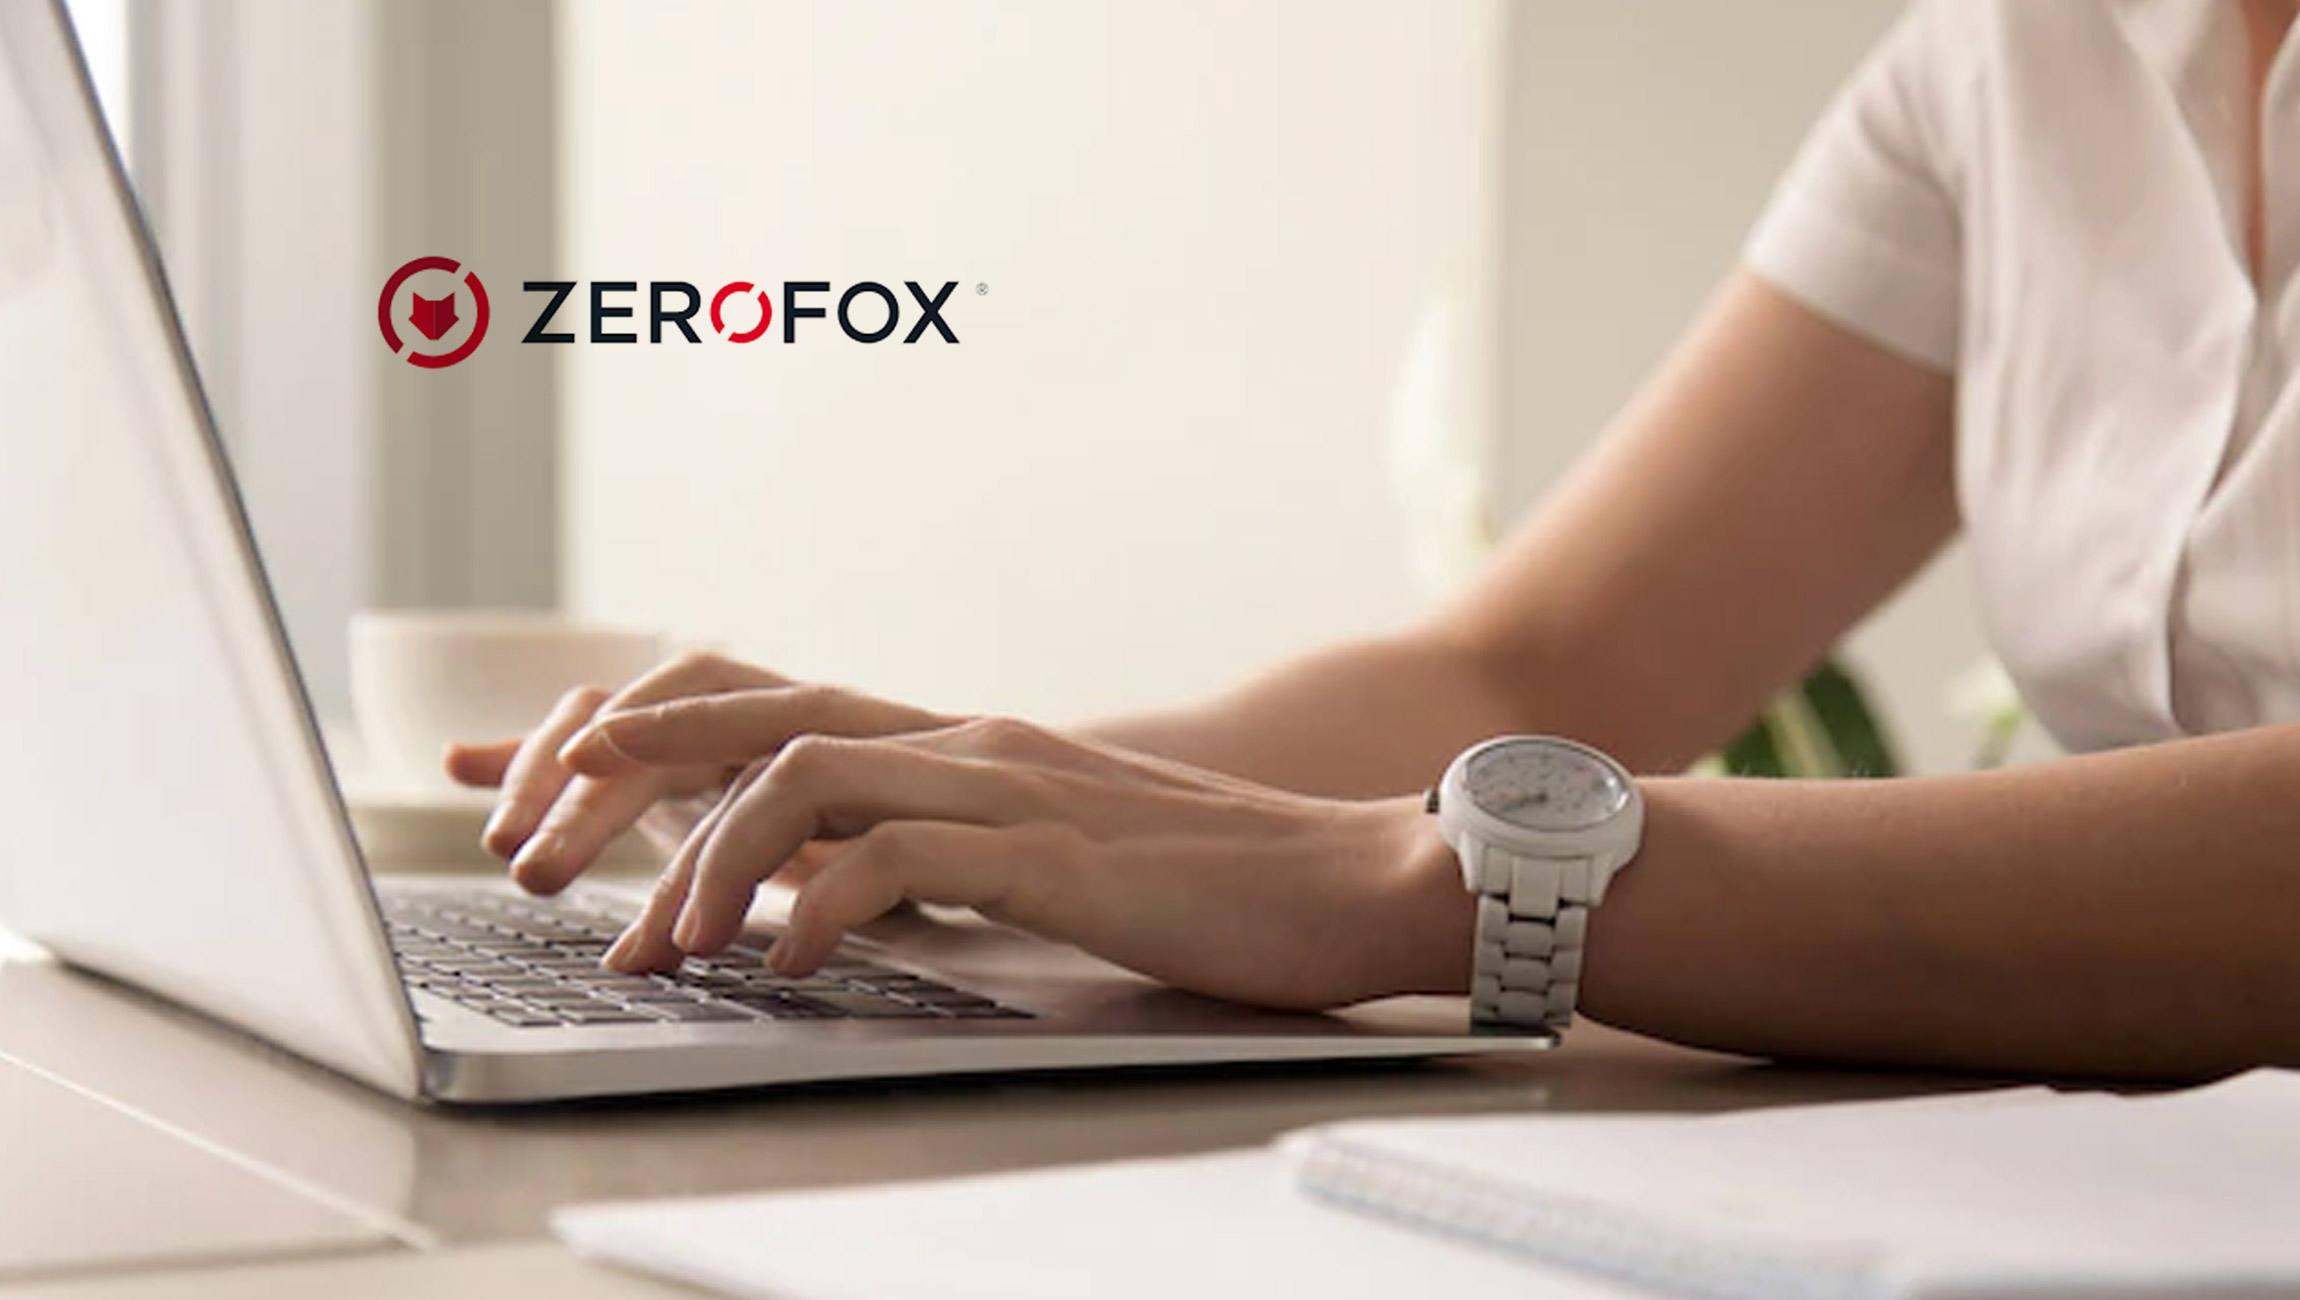 ZeroFox Expands Canadian Presence, Delivering Over 60% Year-Over-Year Increase in Impersonation and Malicious Content Takedowns for Canadian Customers 1